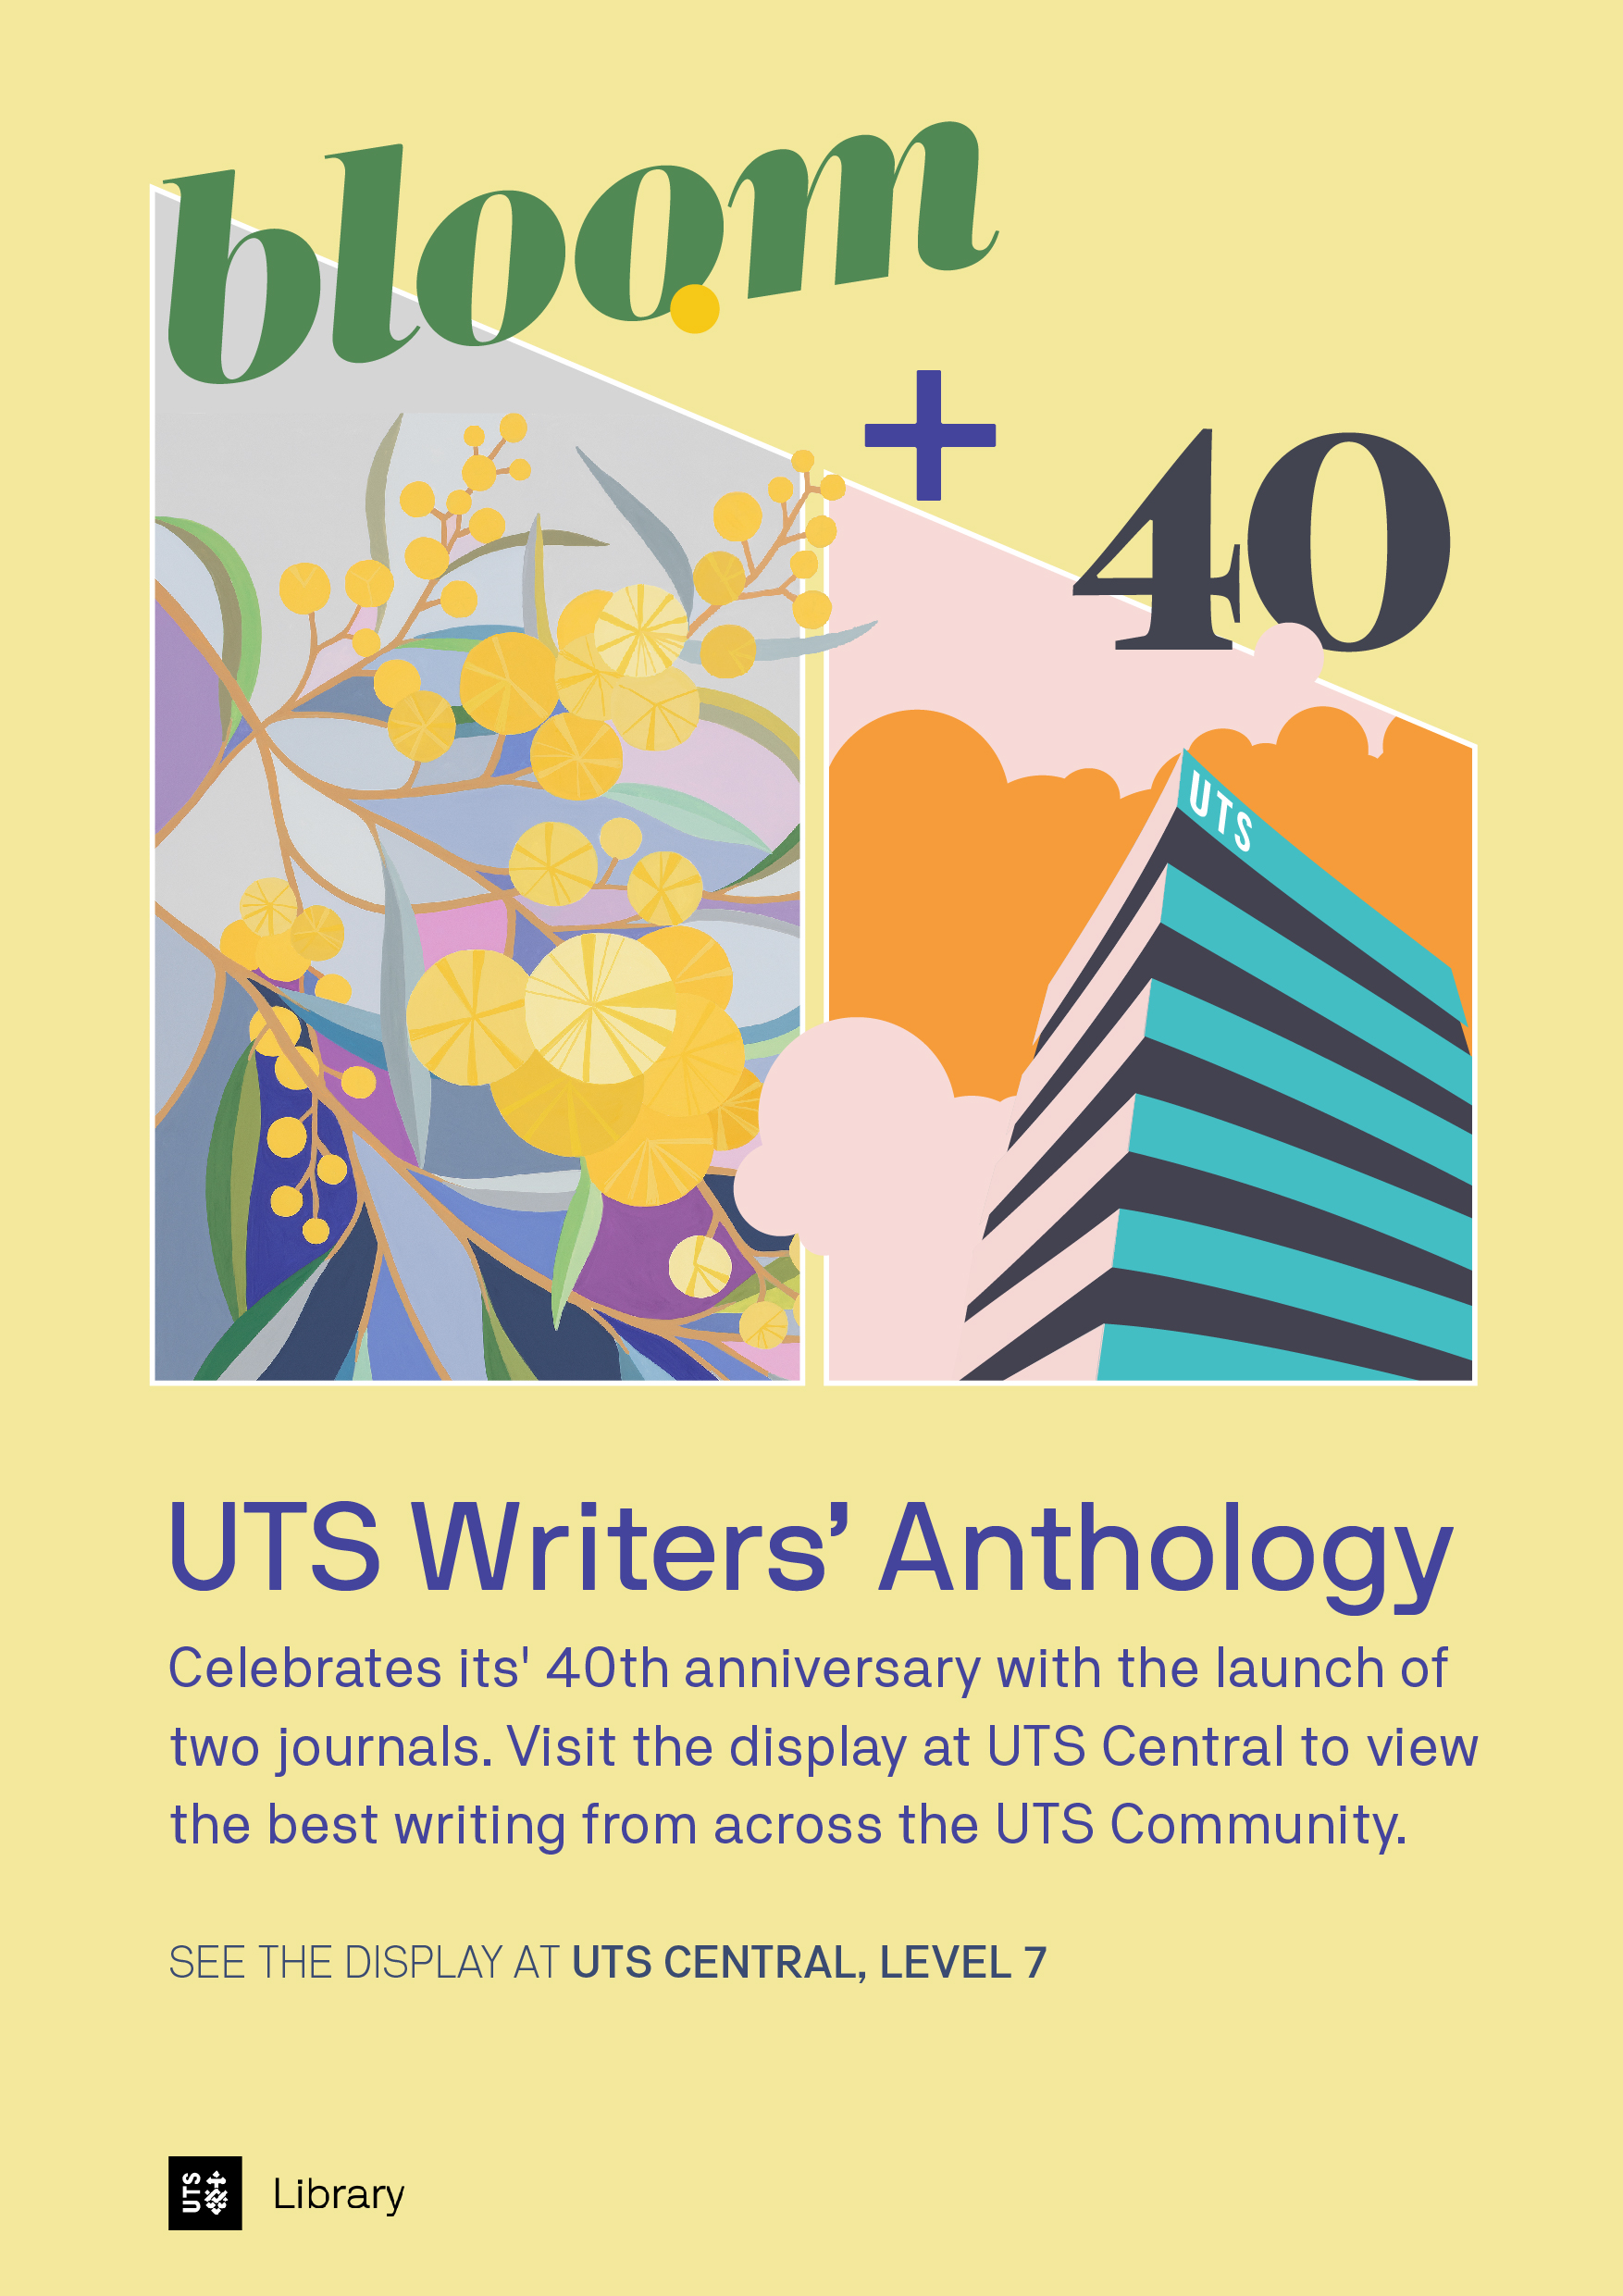 uts library literature review